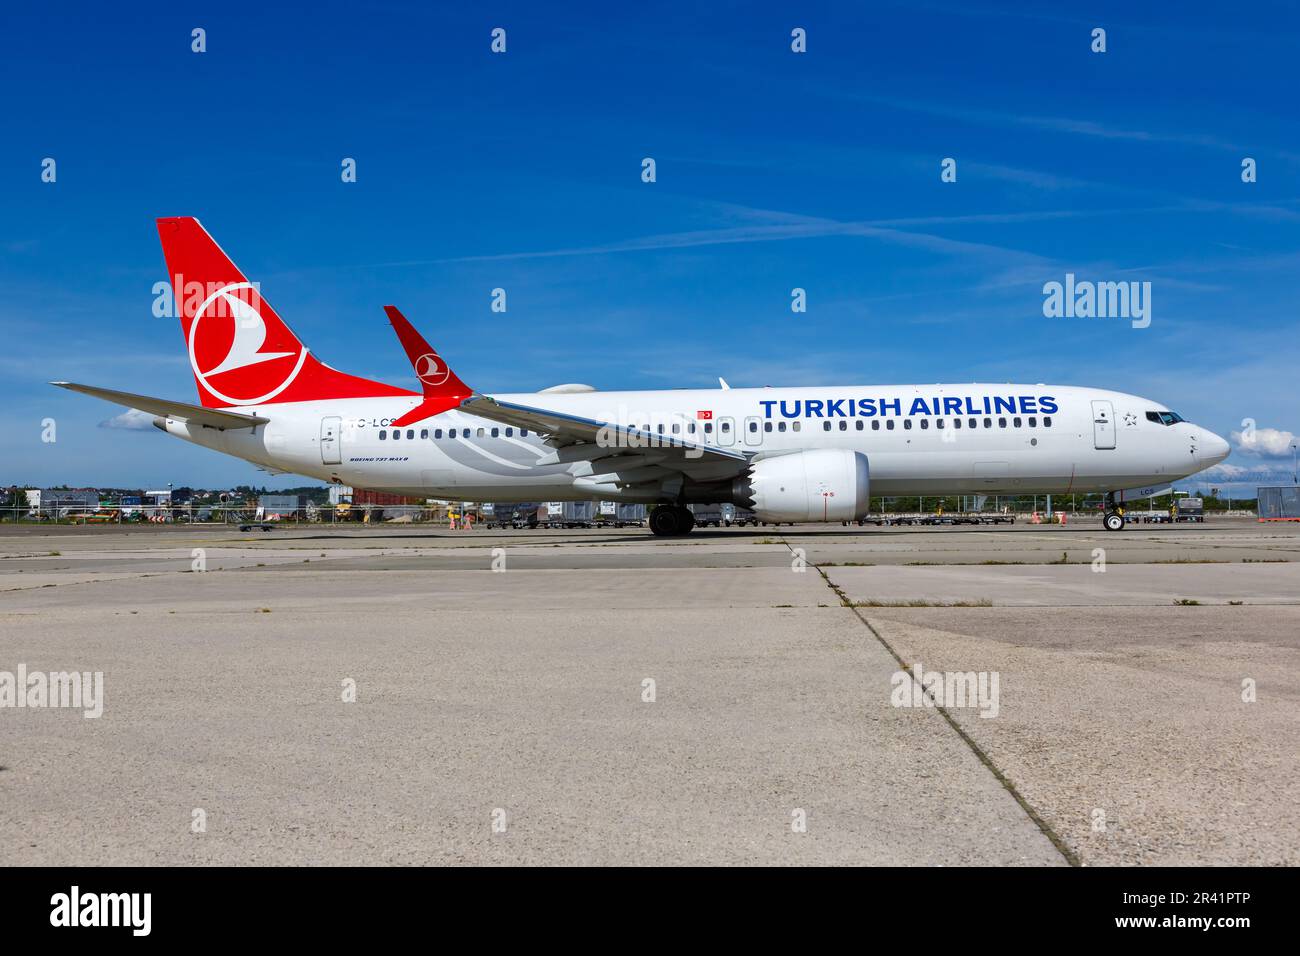 Turkish Airlines Boeing 737 MAX 8 aircraft Stuttgart airport in Germany Stock Photo